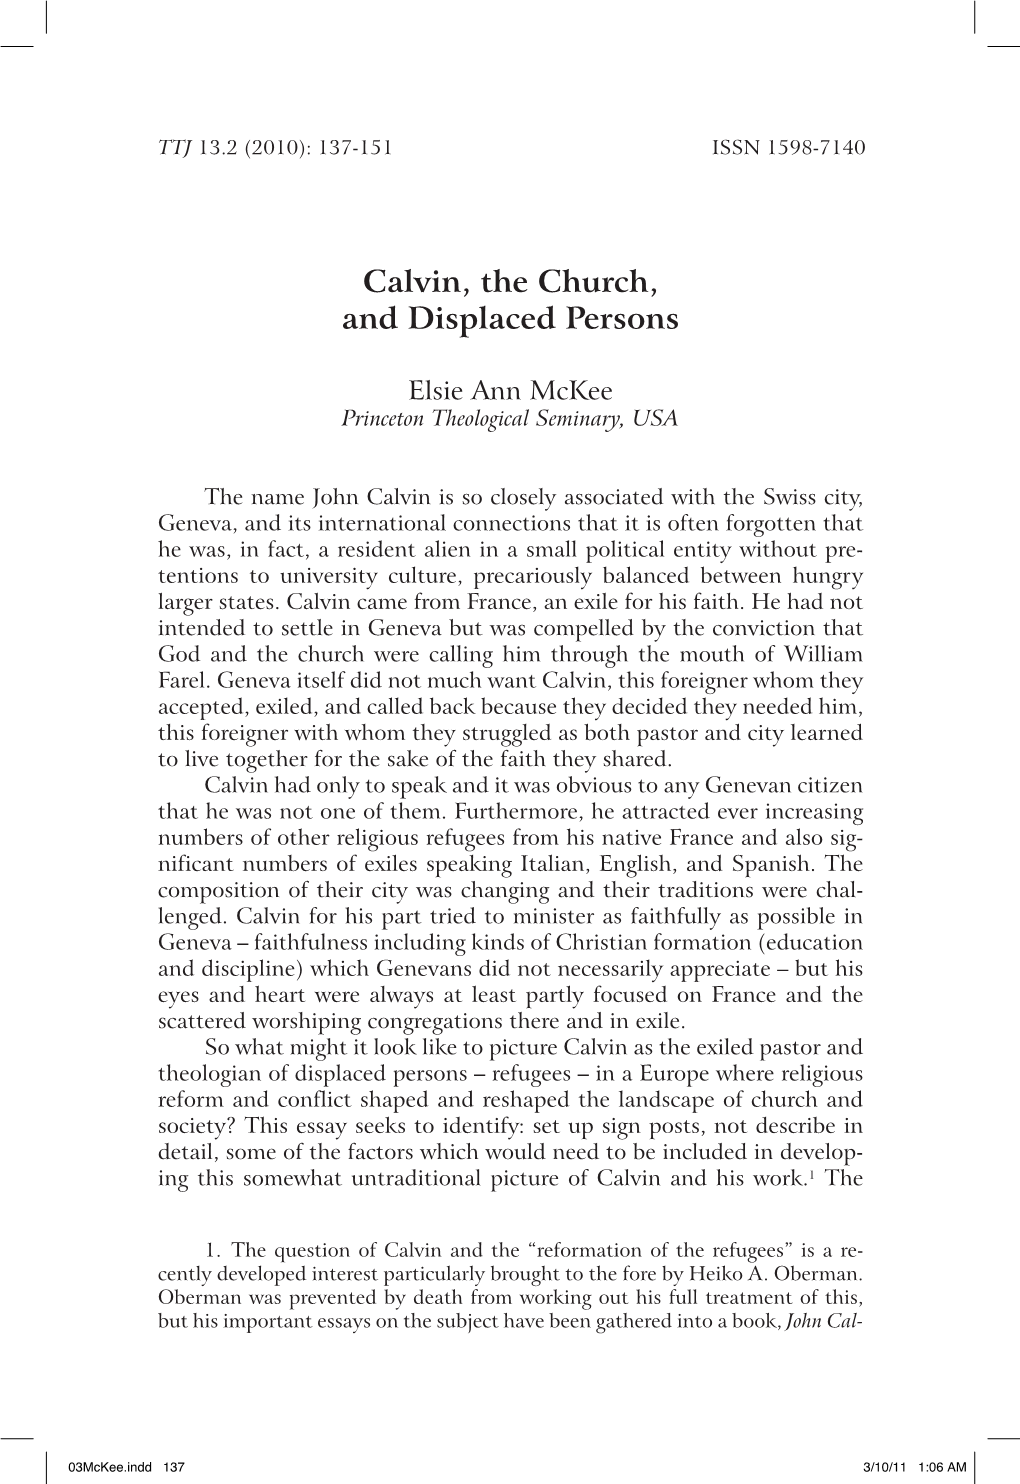 Calvin, the Church, and Displaced Persons